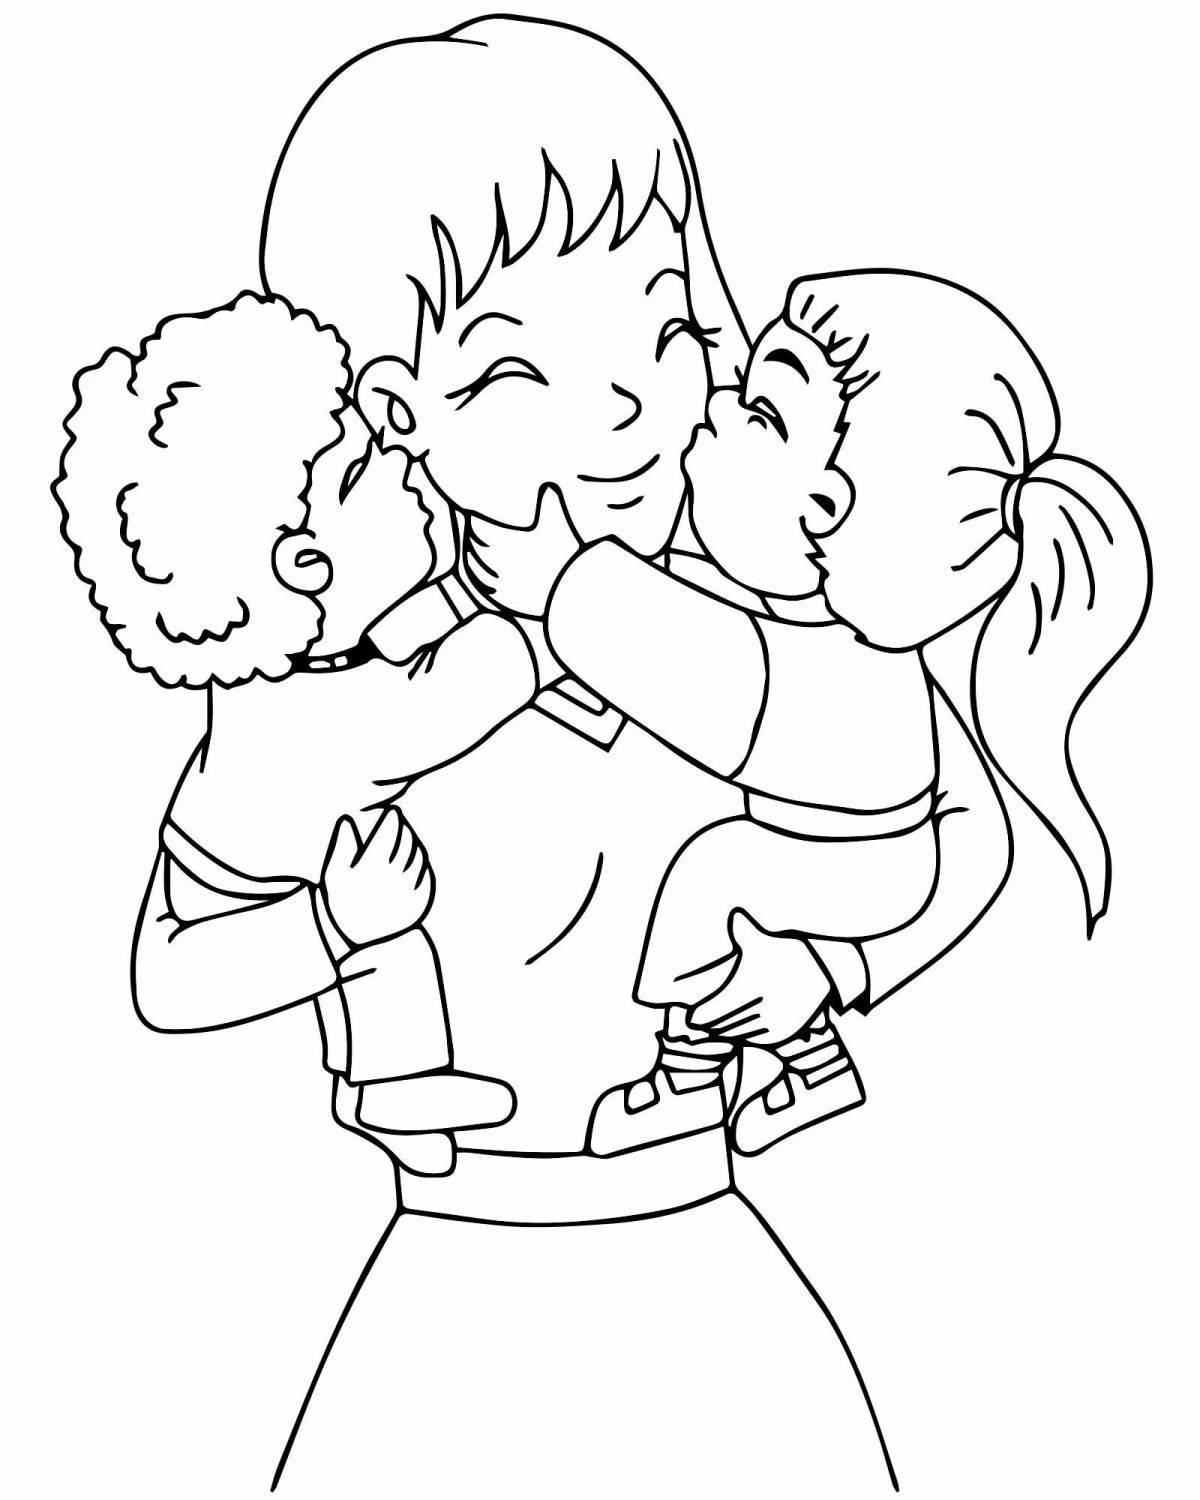 Coloring page adorable mom and baby